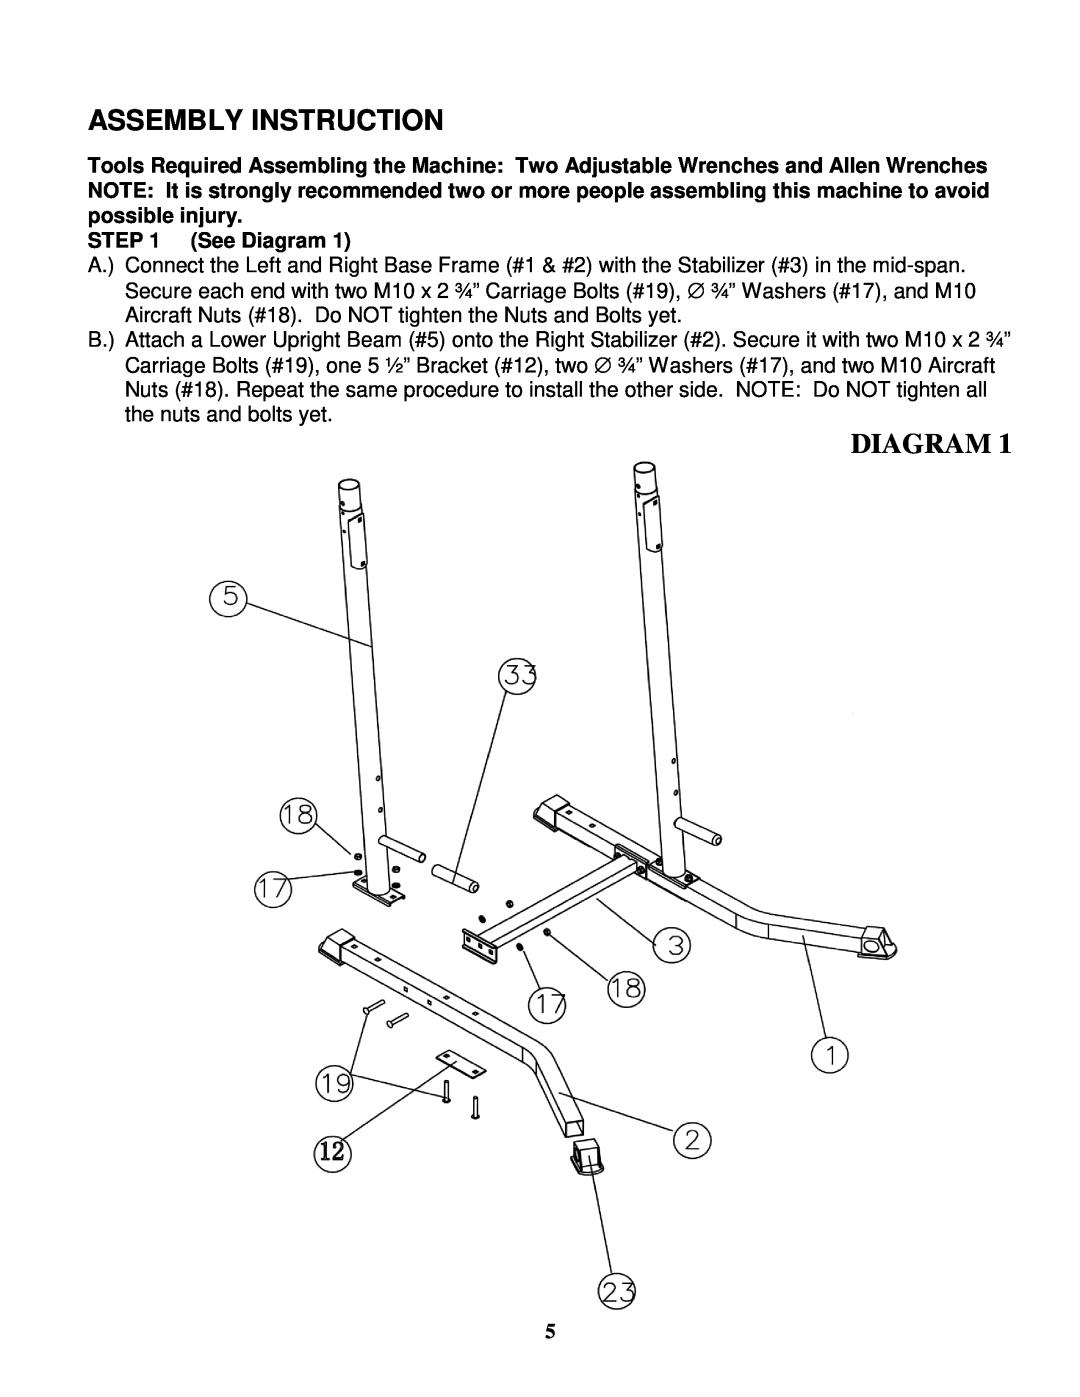 Impex IGS-2110 manual Assembly Instruction, Diagram 